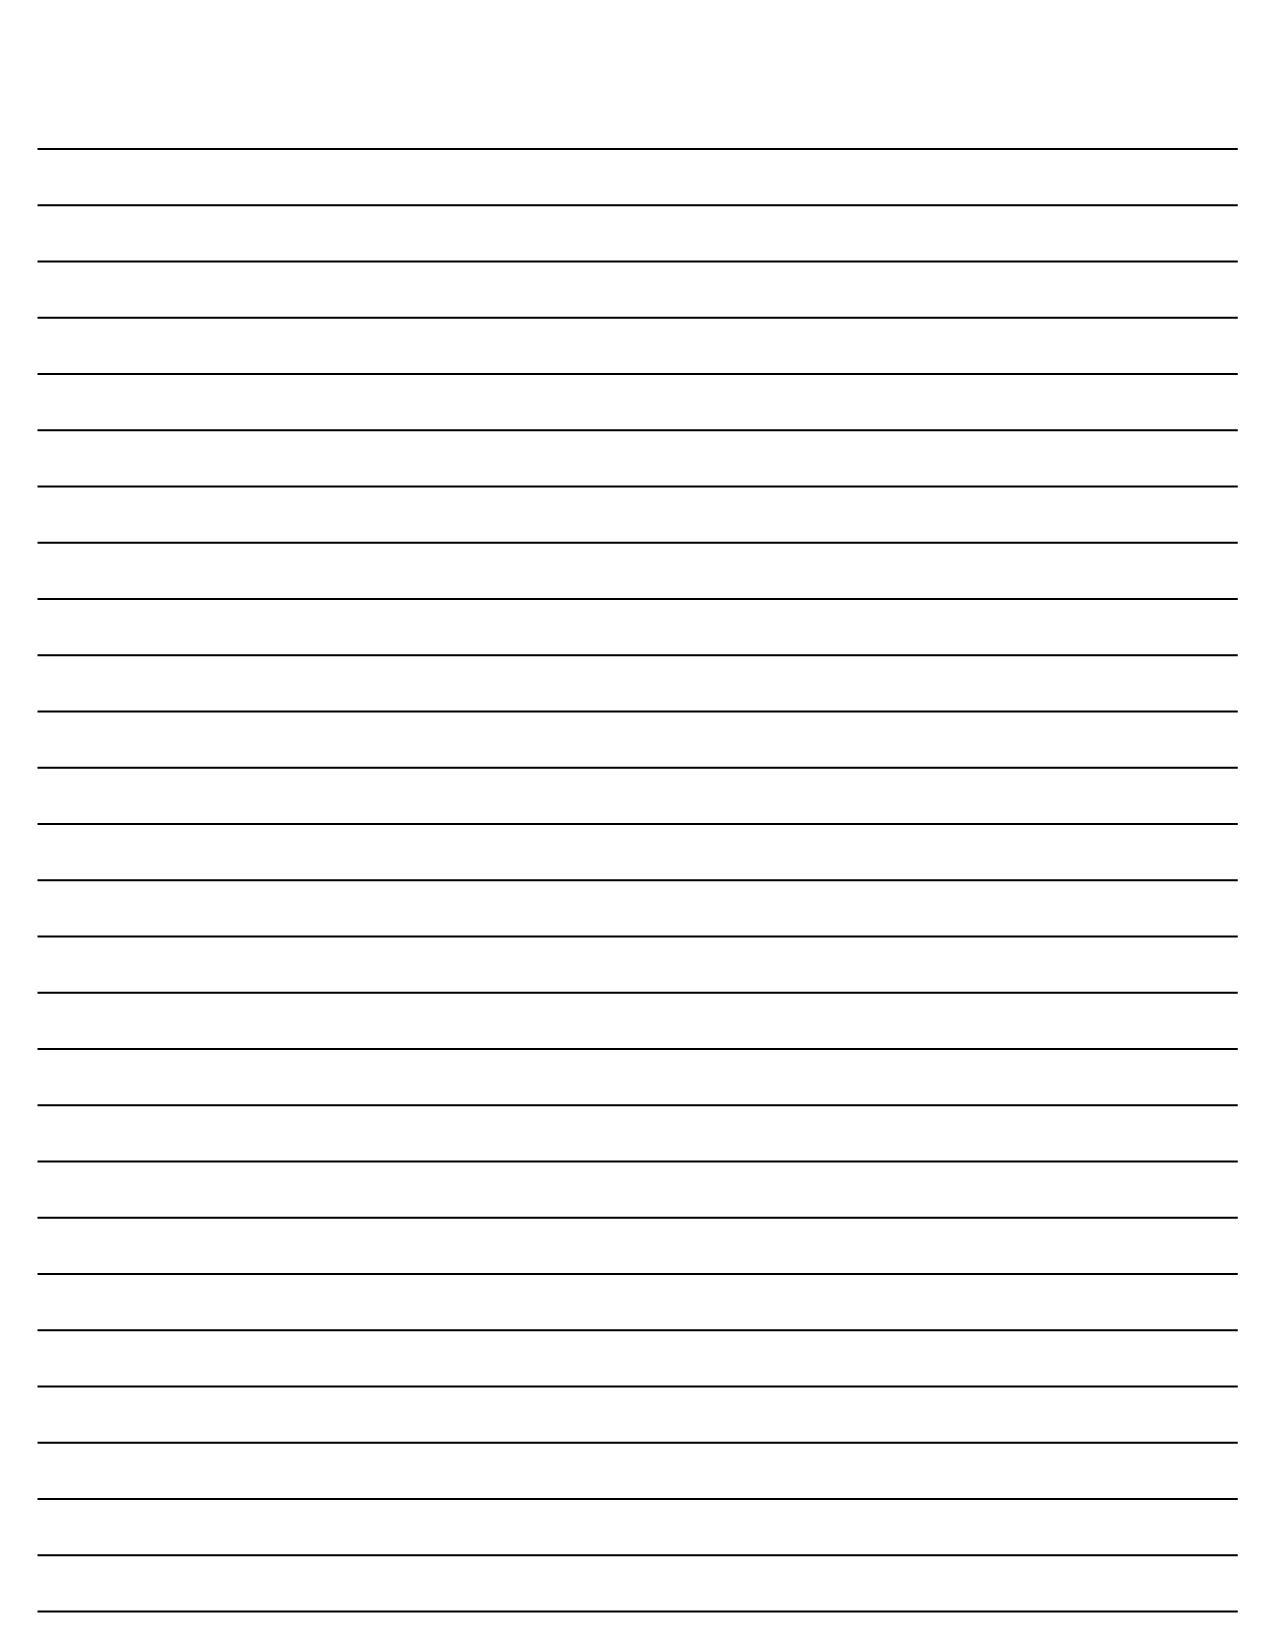 Printable Lined Paper For High School